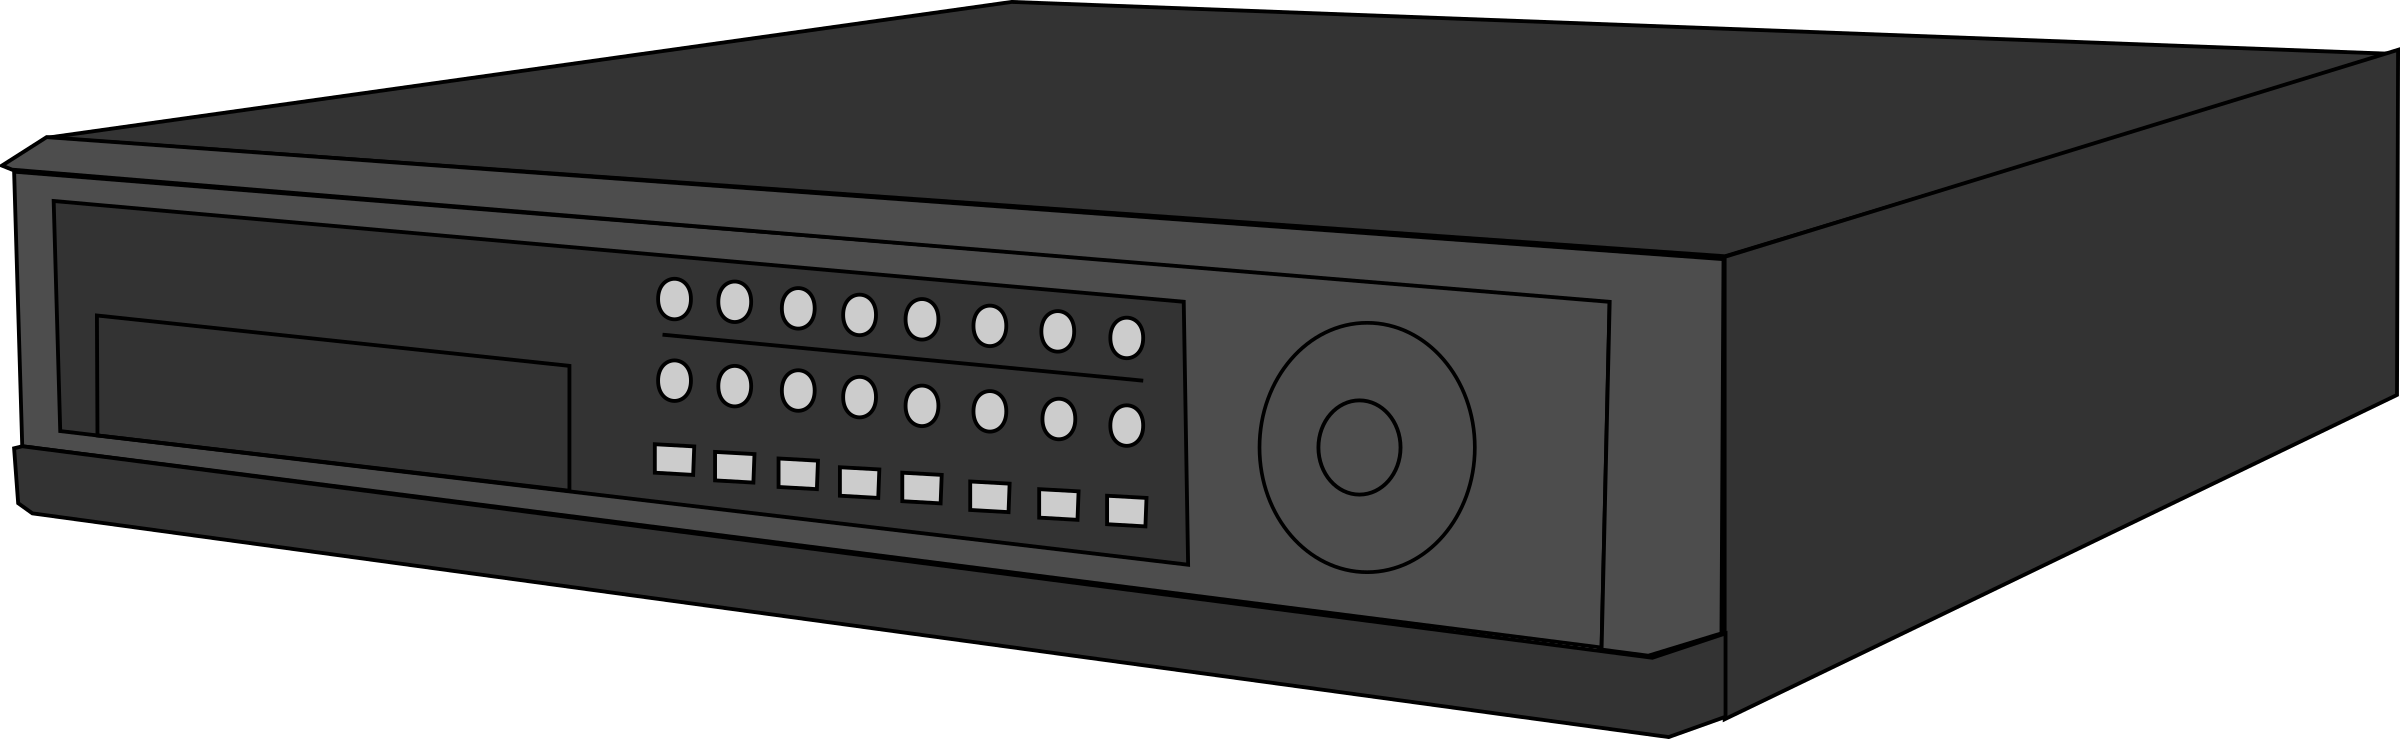 Video Recorder PNG - 173410